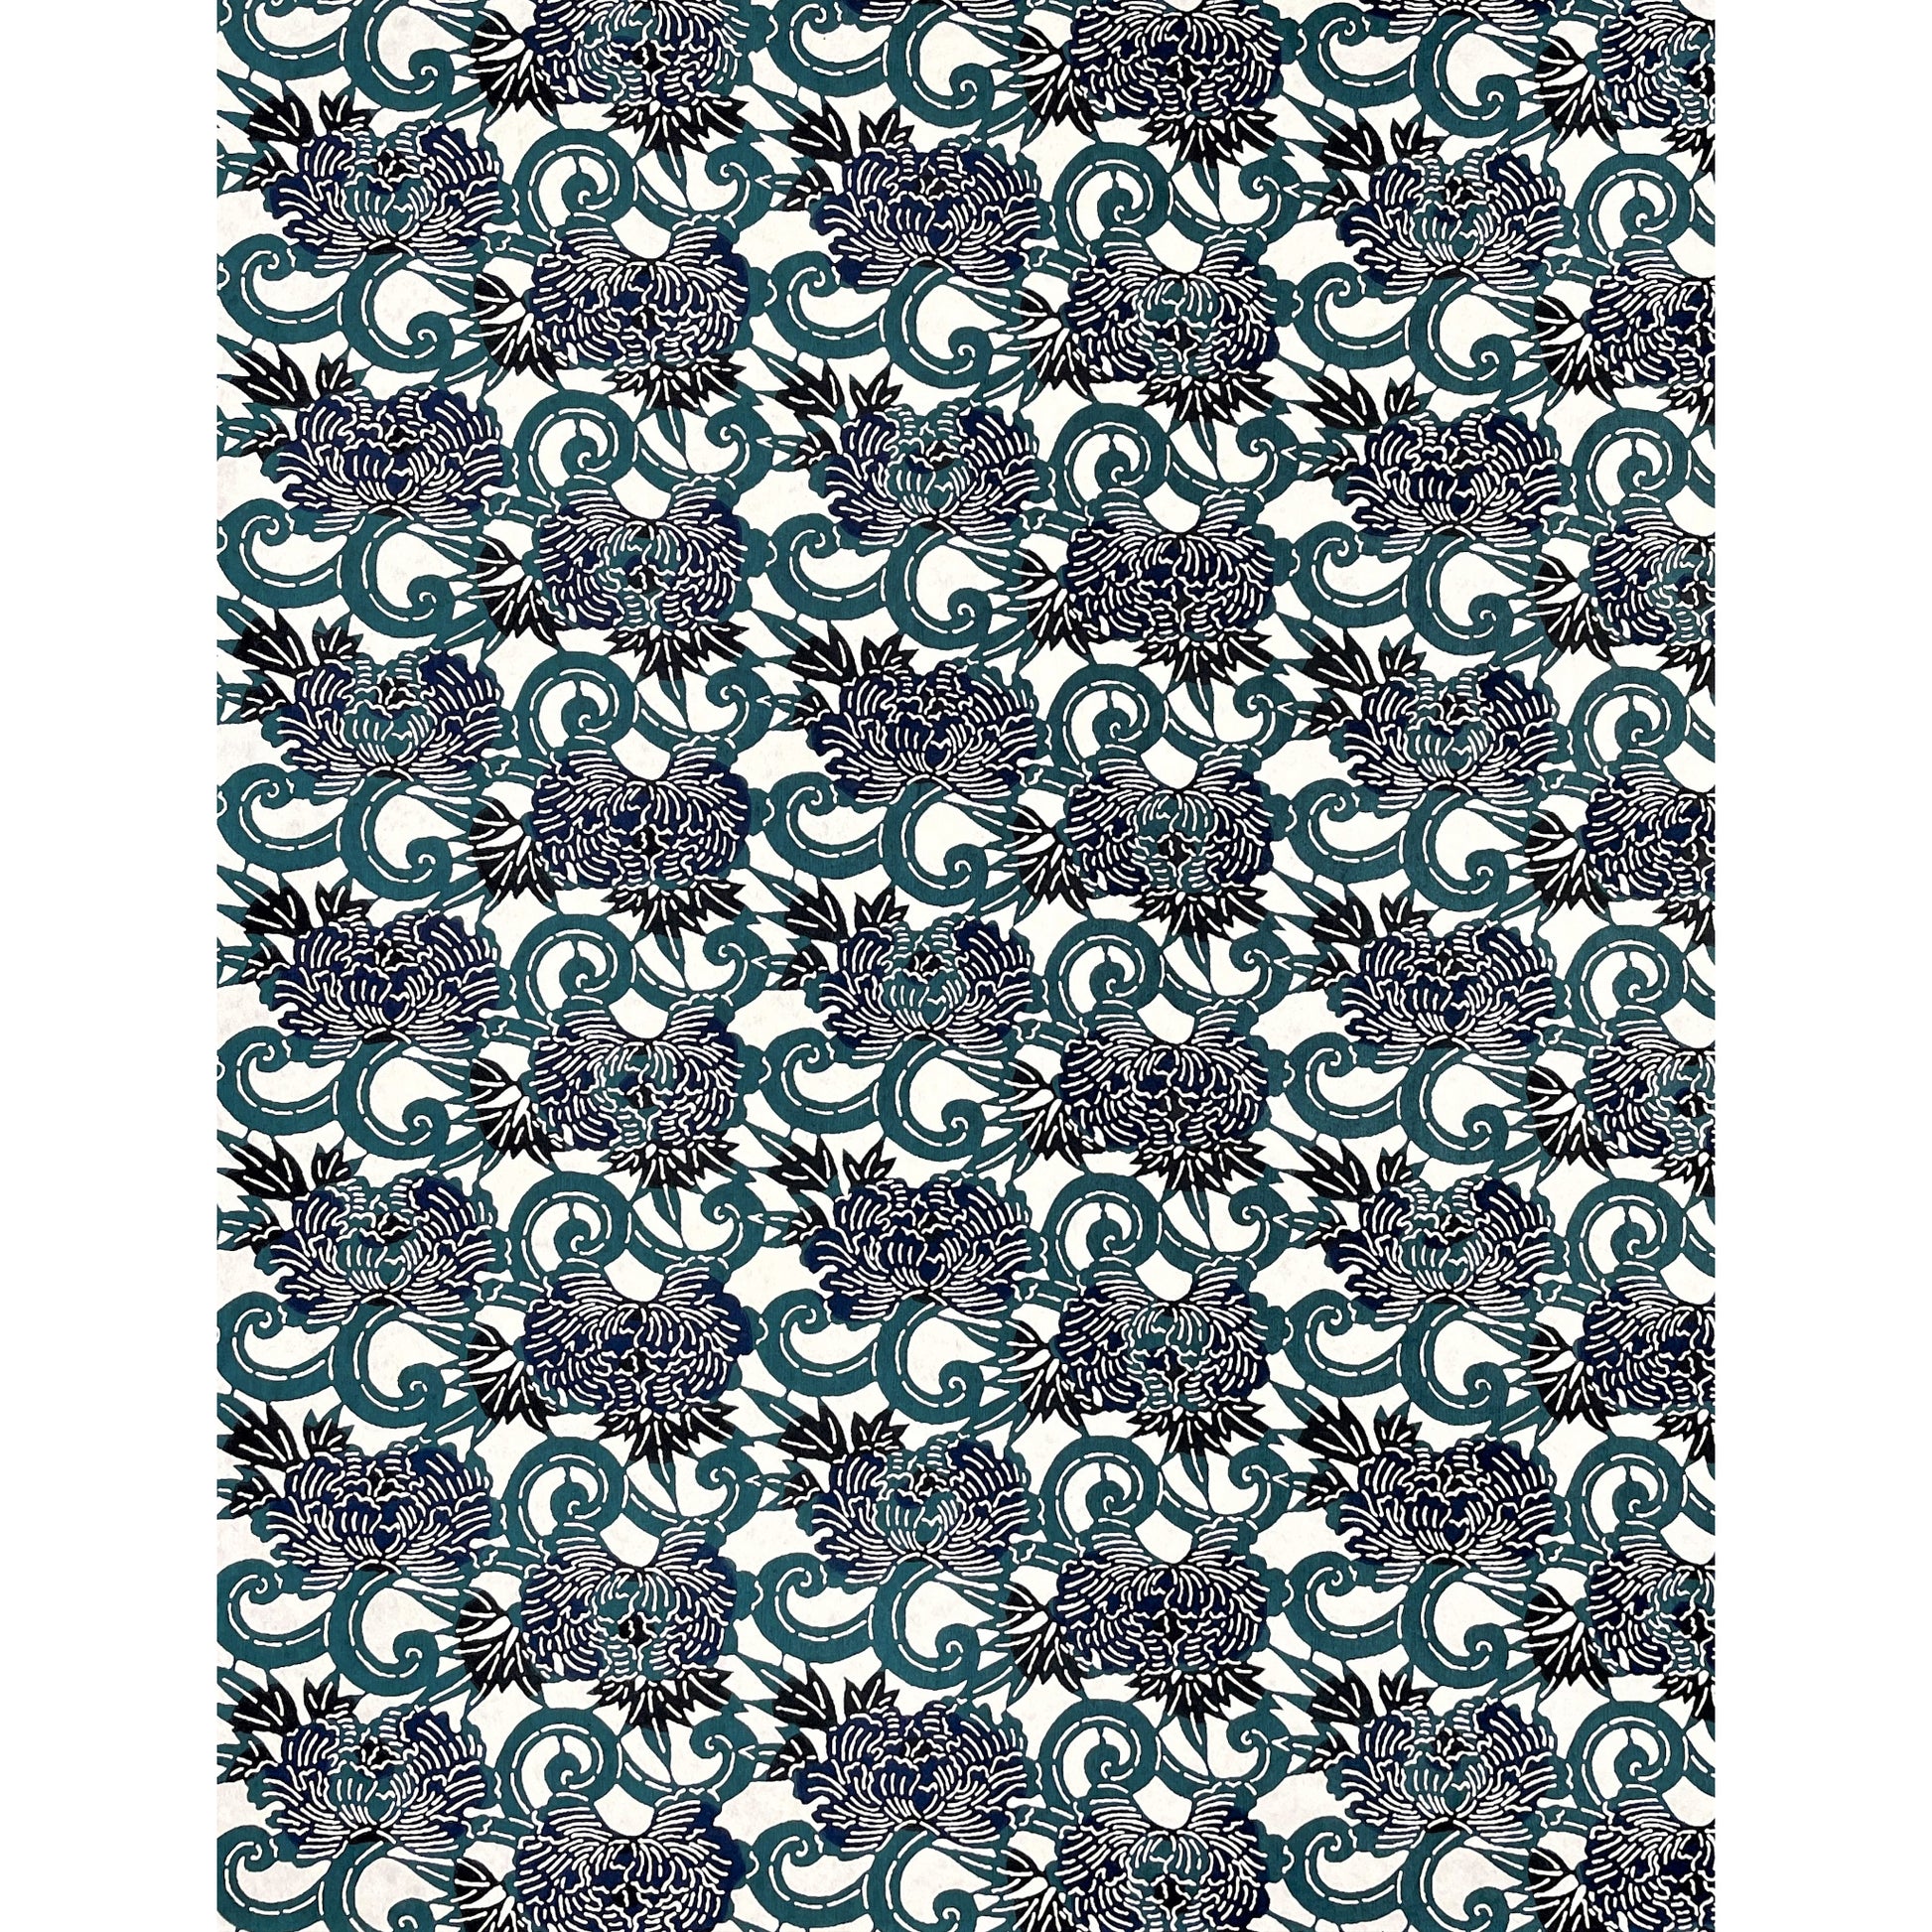 japanese stencil-dyed handmade paper with peony floral repeat pattern in dark teal and blue, full sheet view